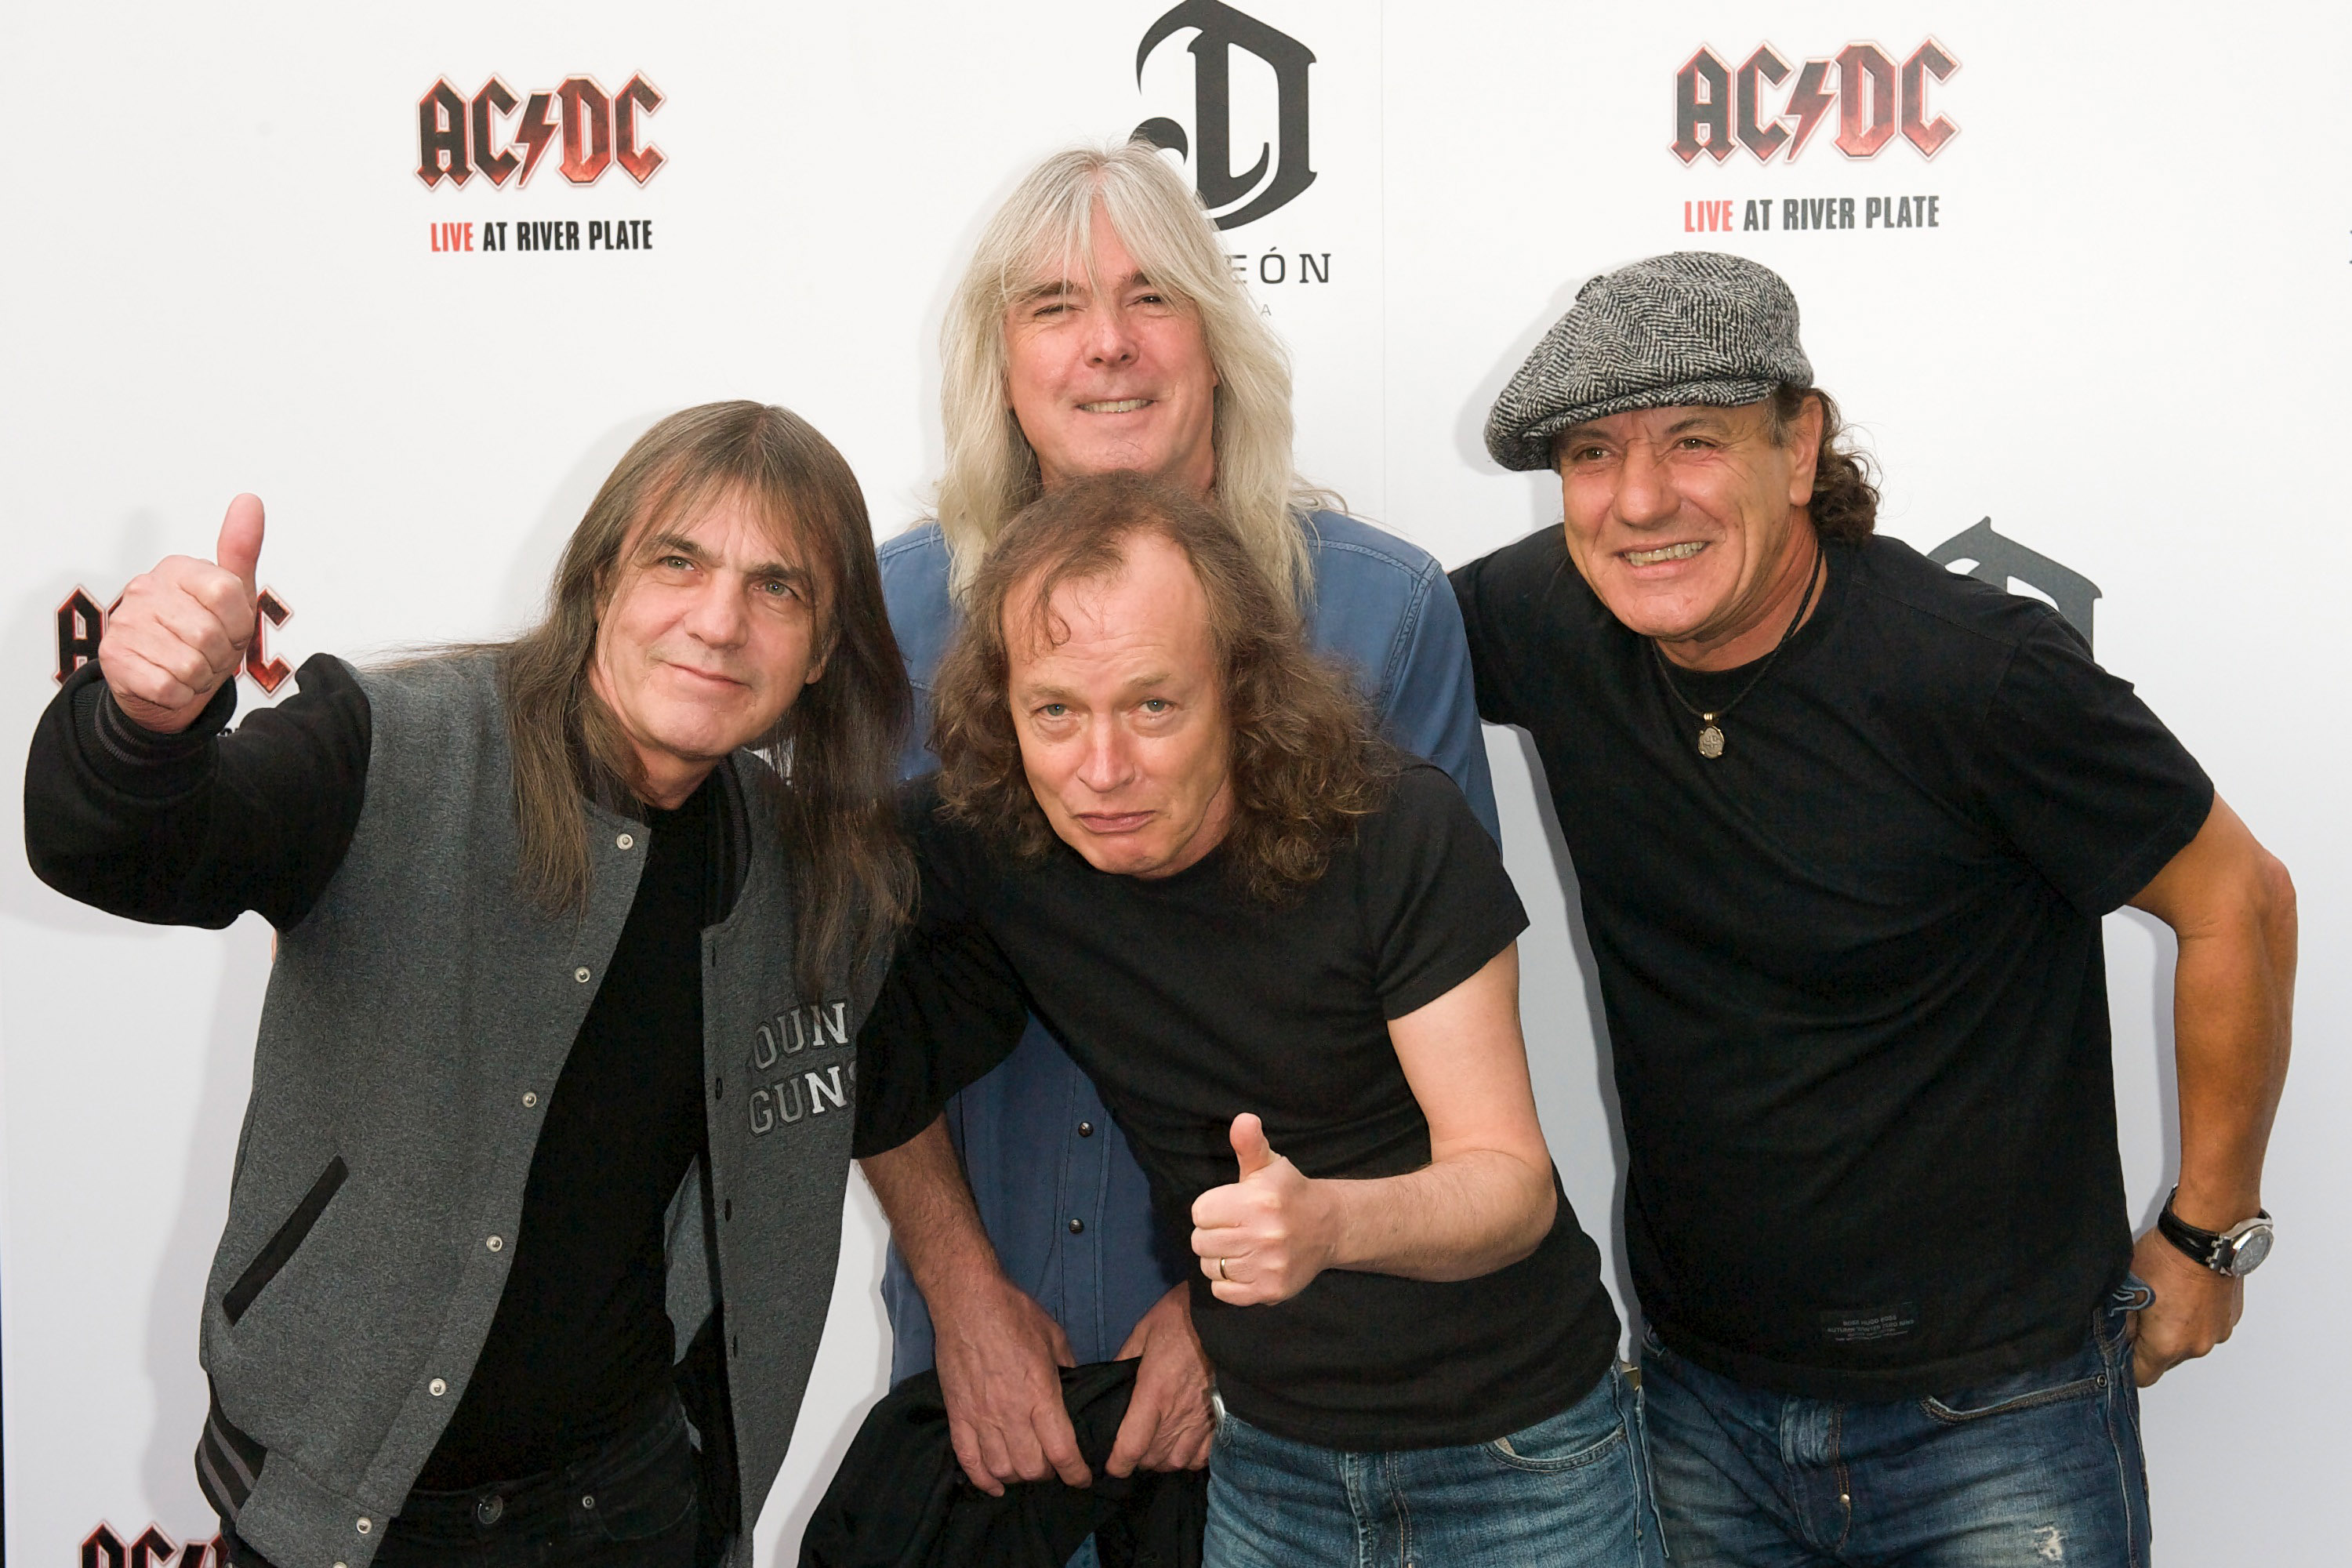 AC/DC band members, from left to right,  Malcolm Young, Cliff Williams, Angus Young and Brian Johnson attend the exclusive world premiere of their album <i>Live at River Plate</i> in London on May 6, 2011 (Jorge Herrera—WireImage/Getty Images)